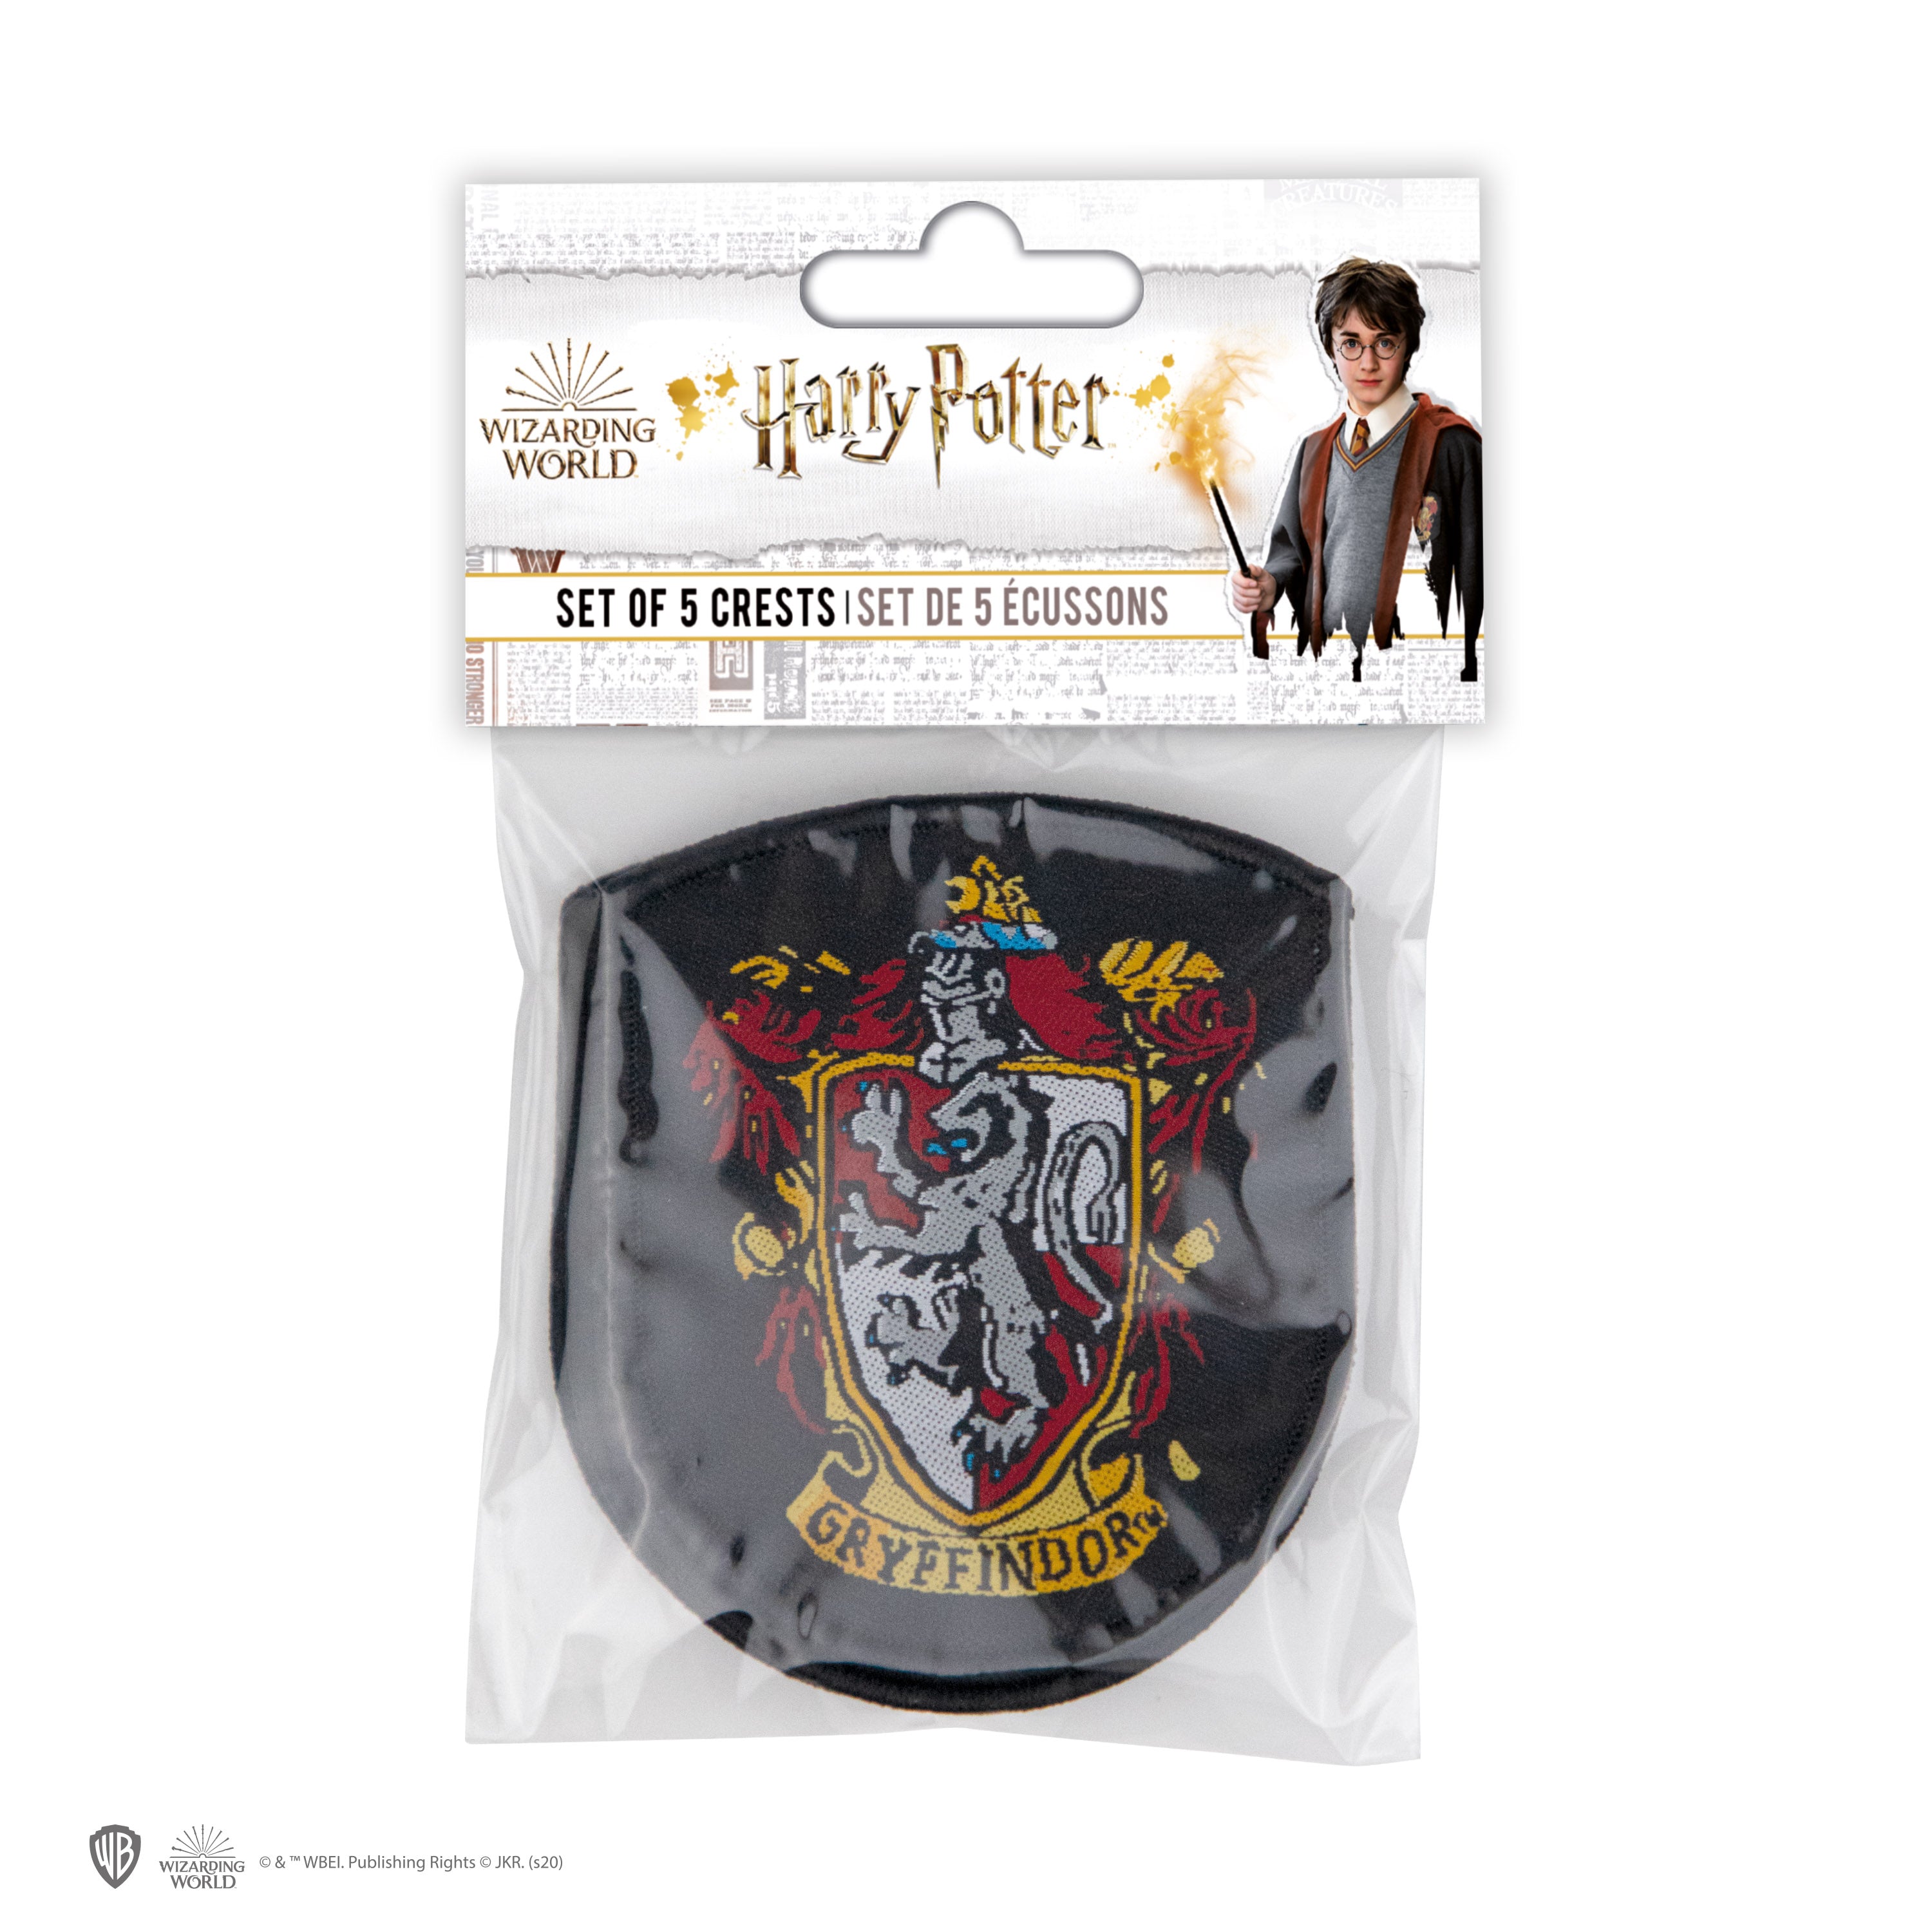 HARRY POTTER SEWING KITS - NEW !! TRAVEL SIZE KIT ! GREAT STOCKING